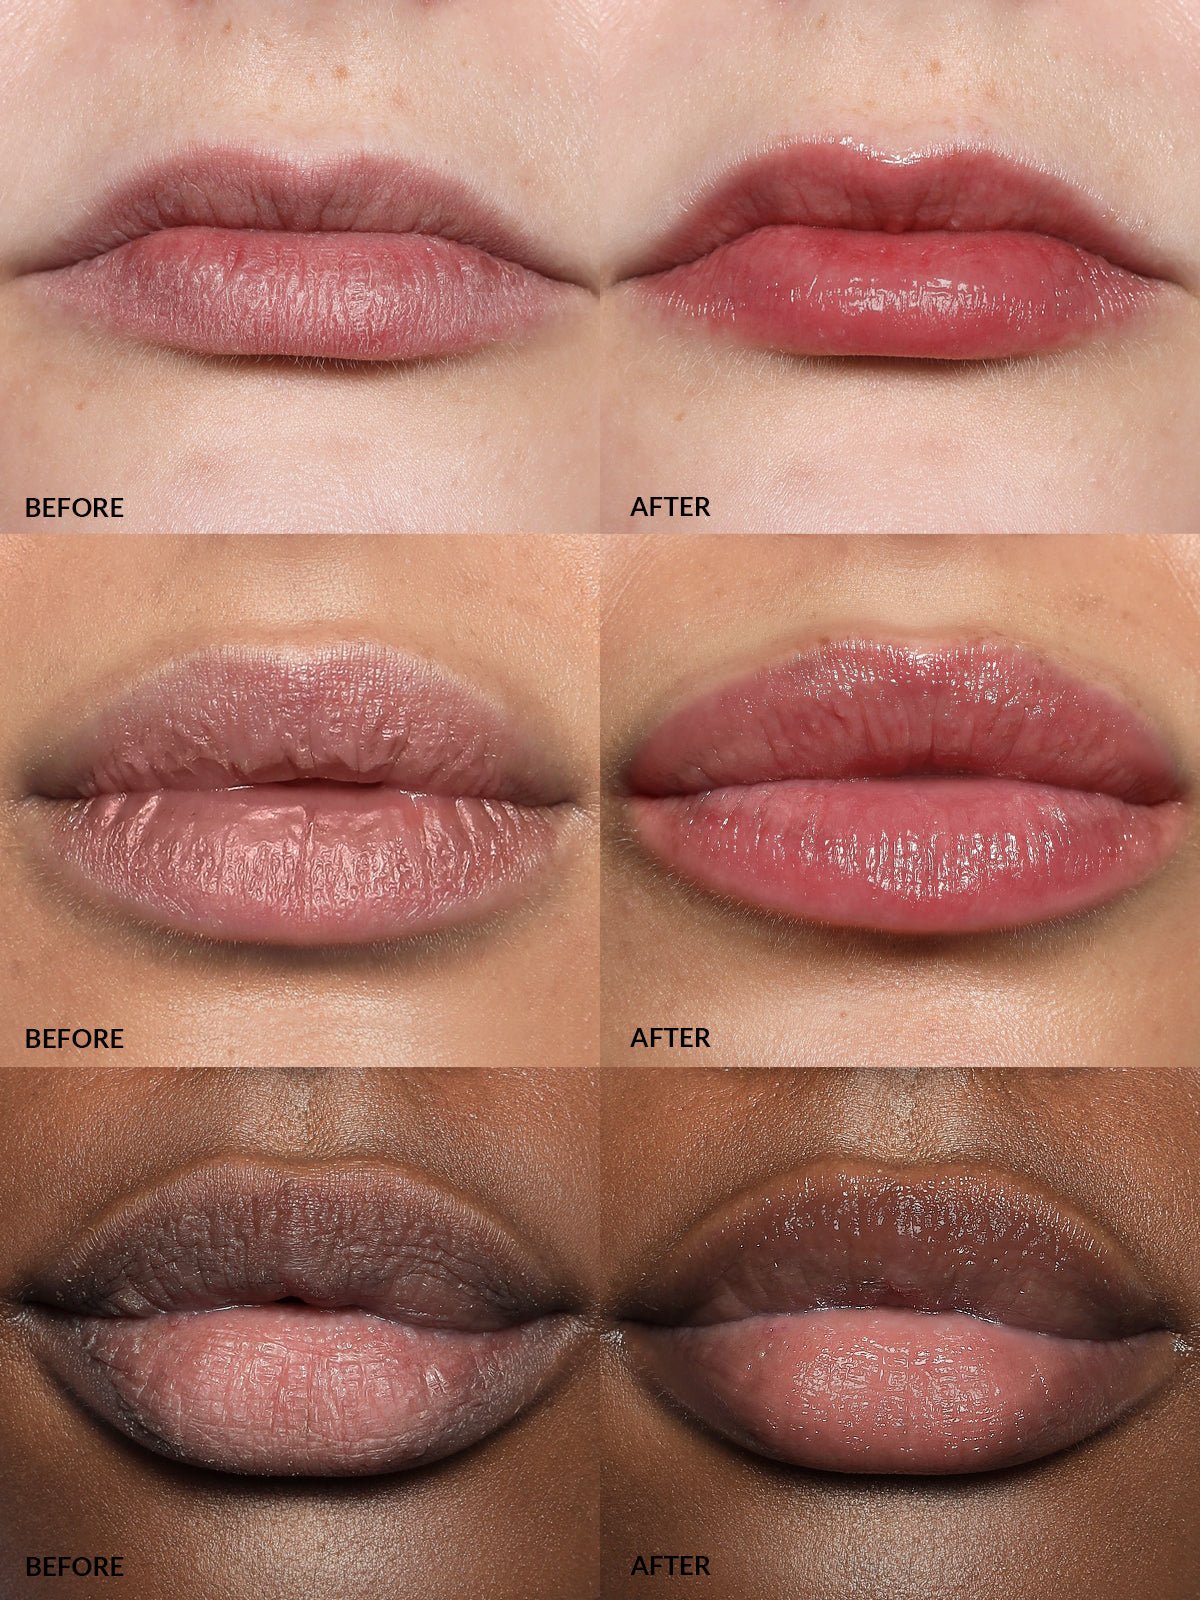 LIPS BEFORE AND AFTER REFY LIP BUFF. TESTED ON DIFFERENT SKIN TONES